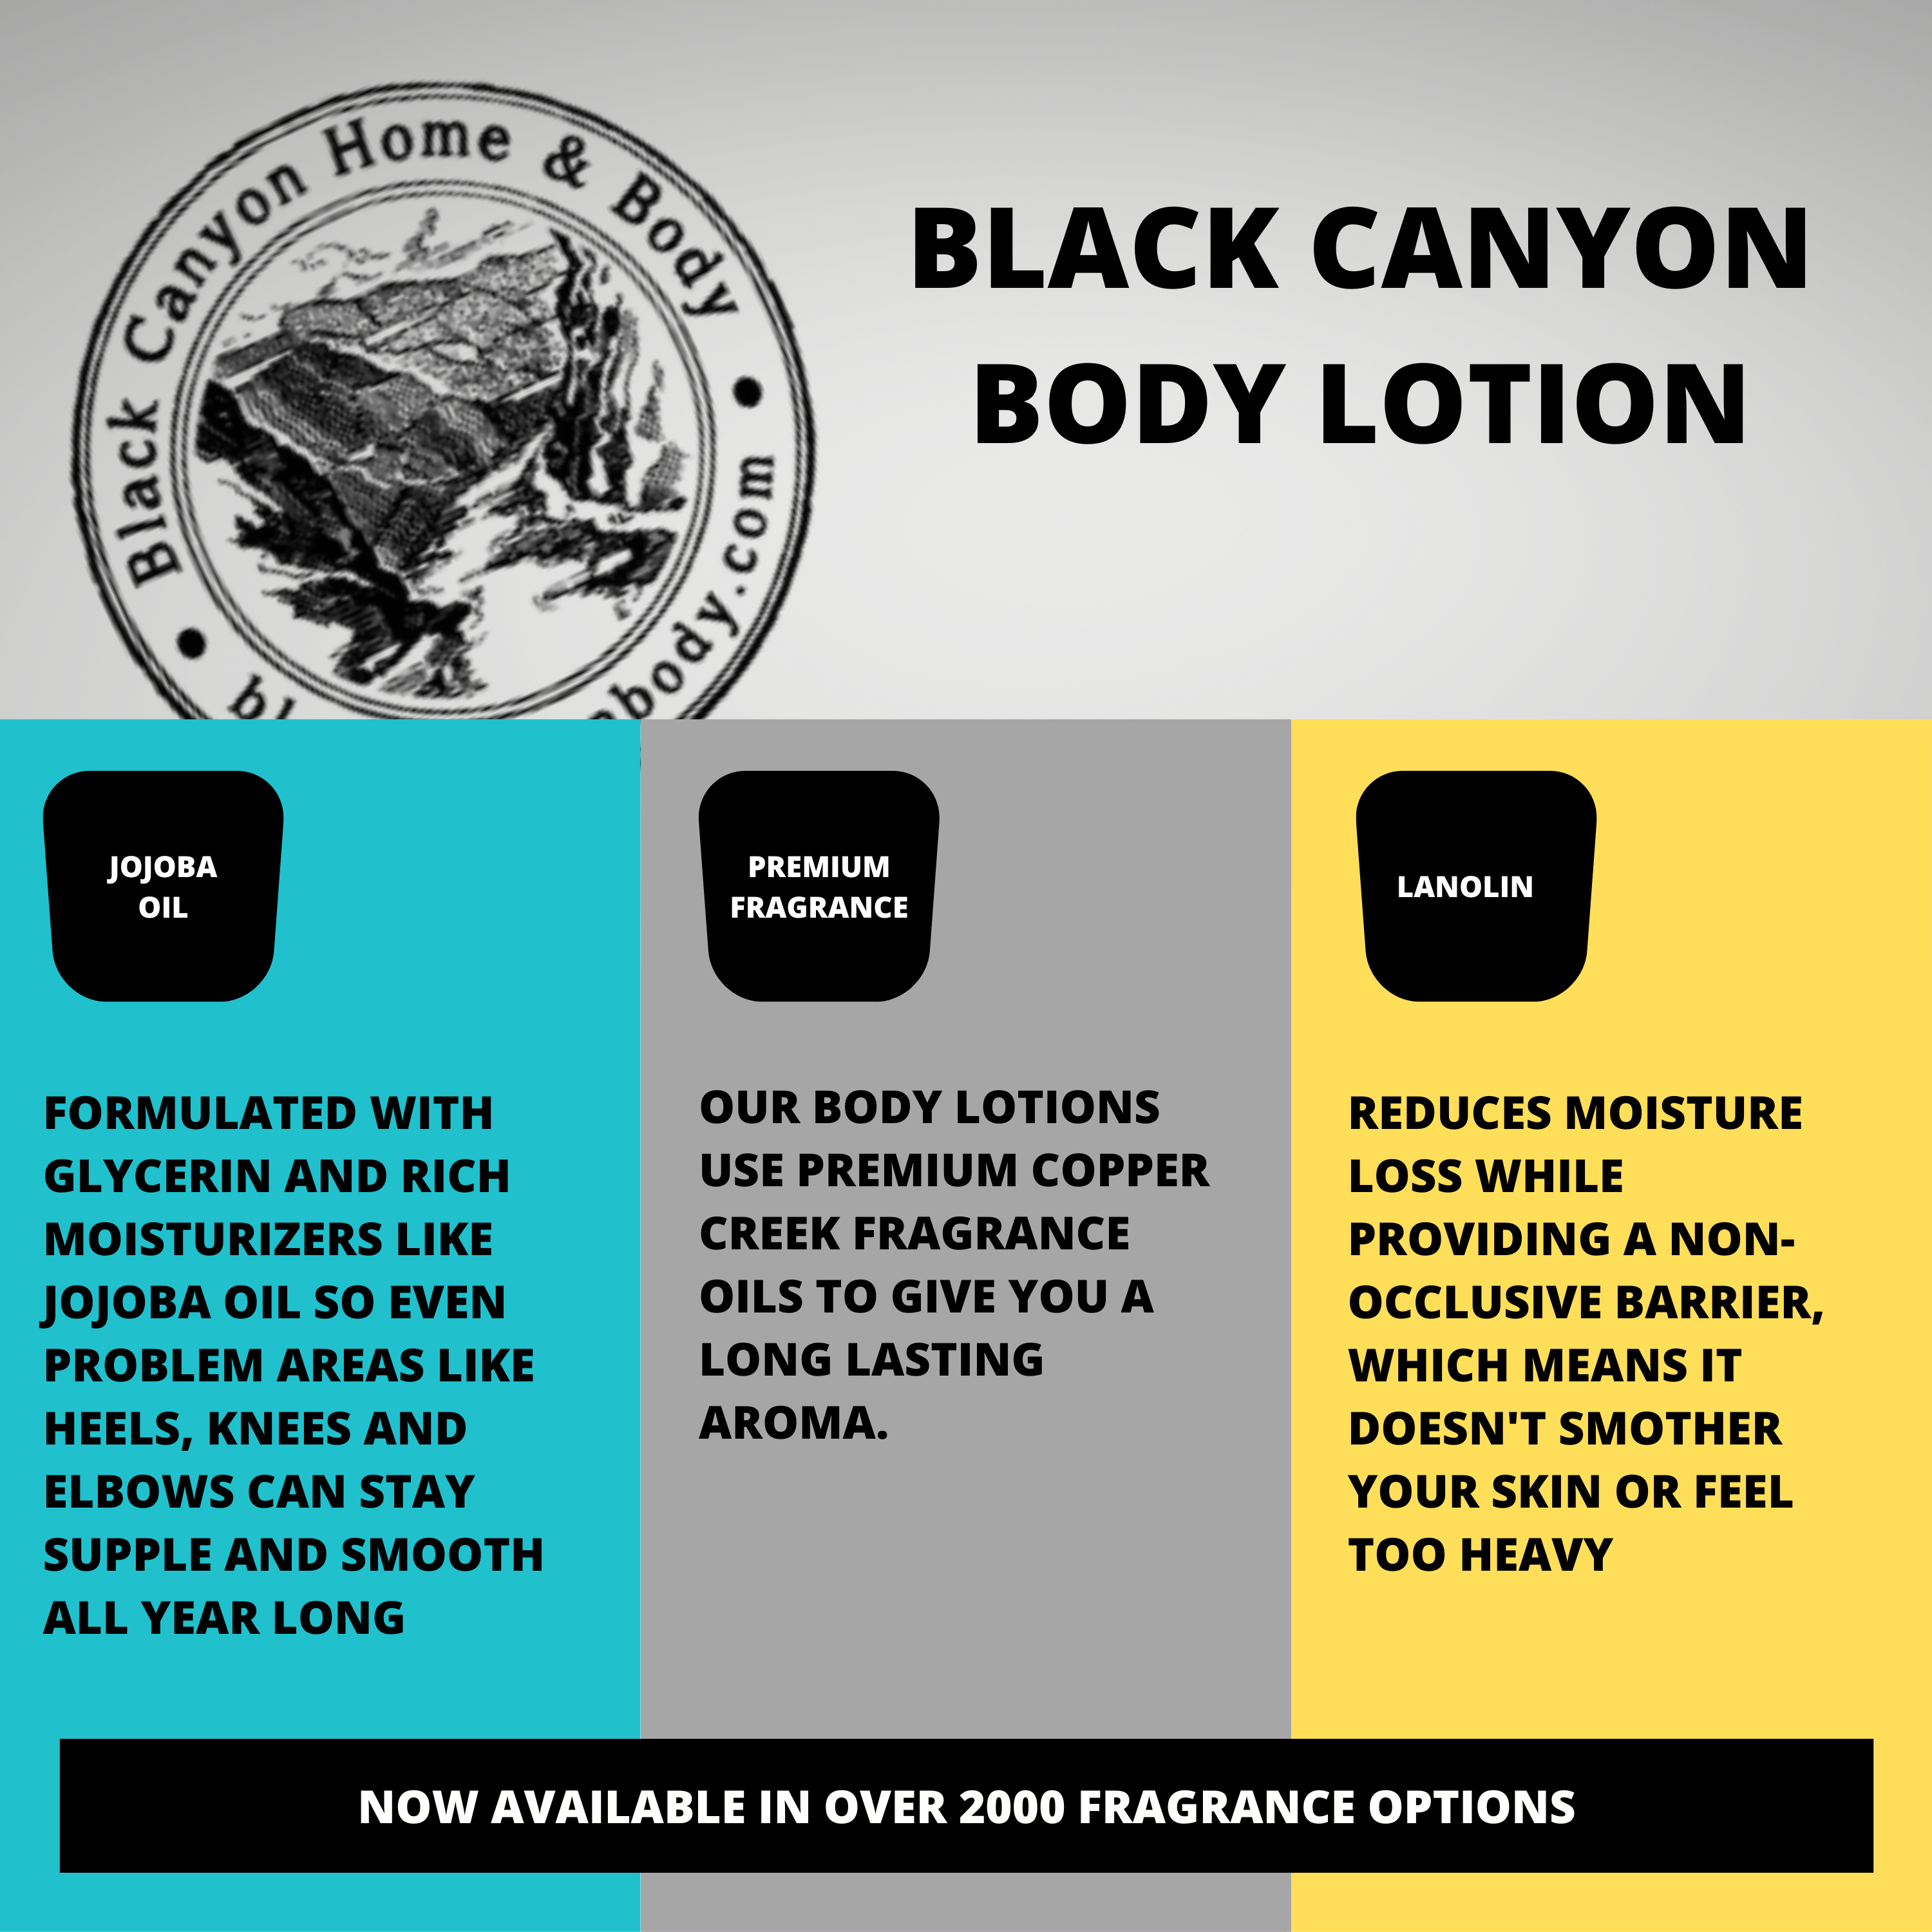 Black Canyon Black Currant & Jasmine Scented Luxury Body Lotion with Lanolin and Jojoba Oil